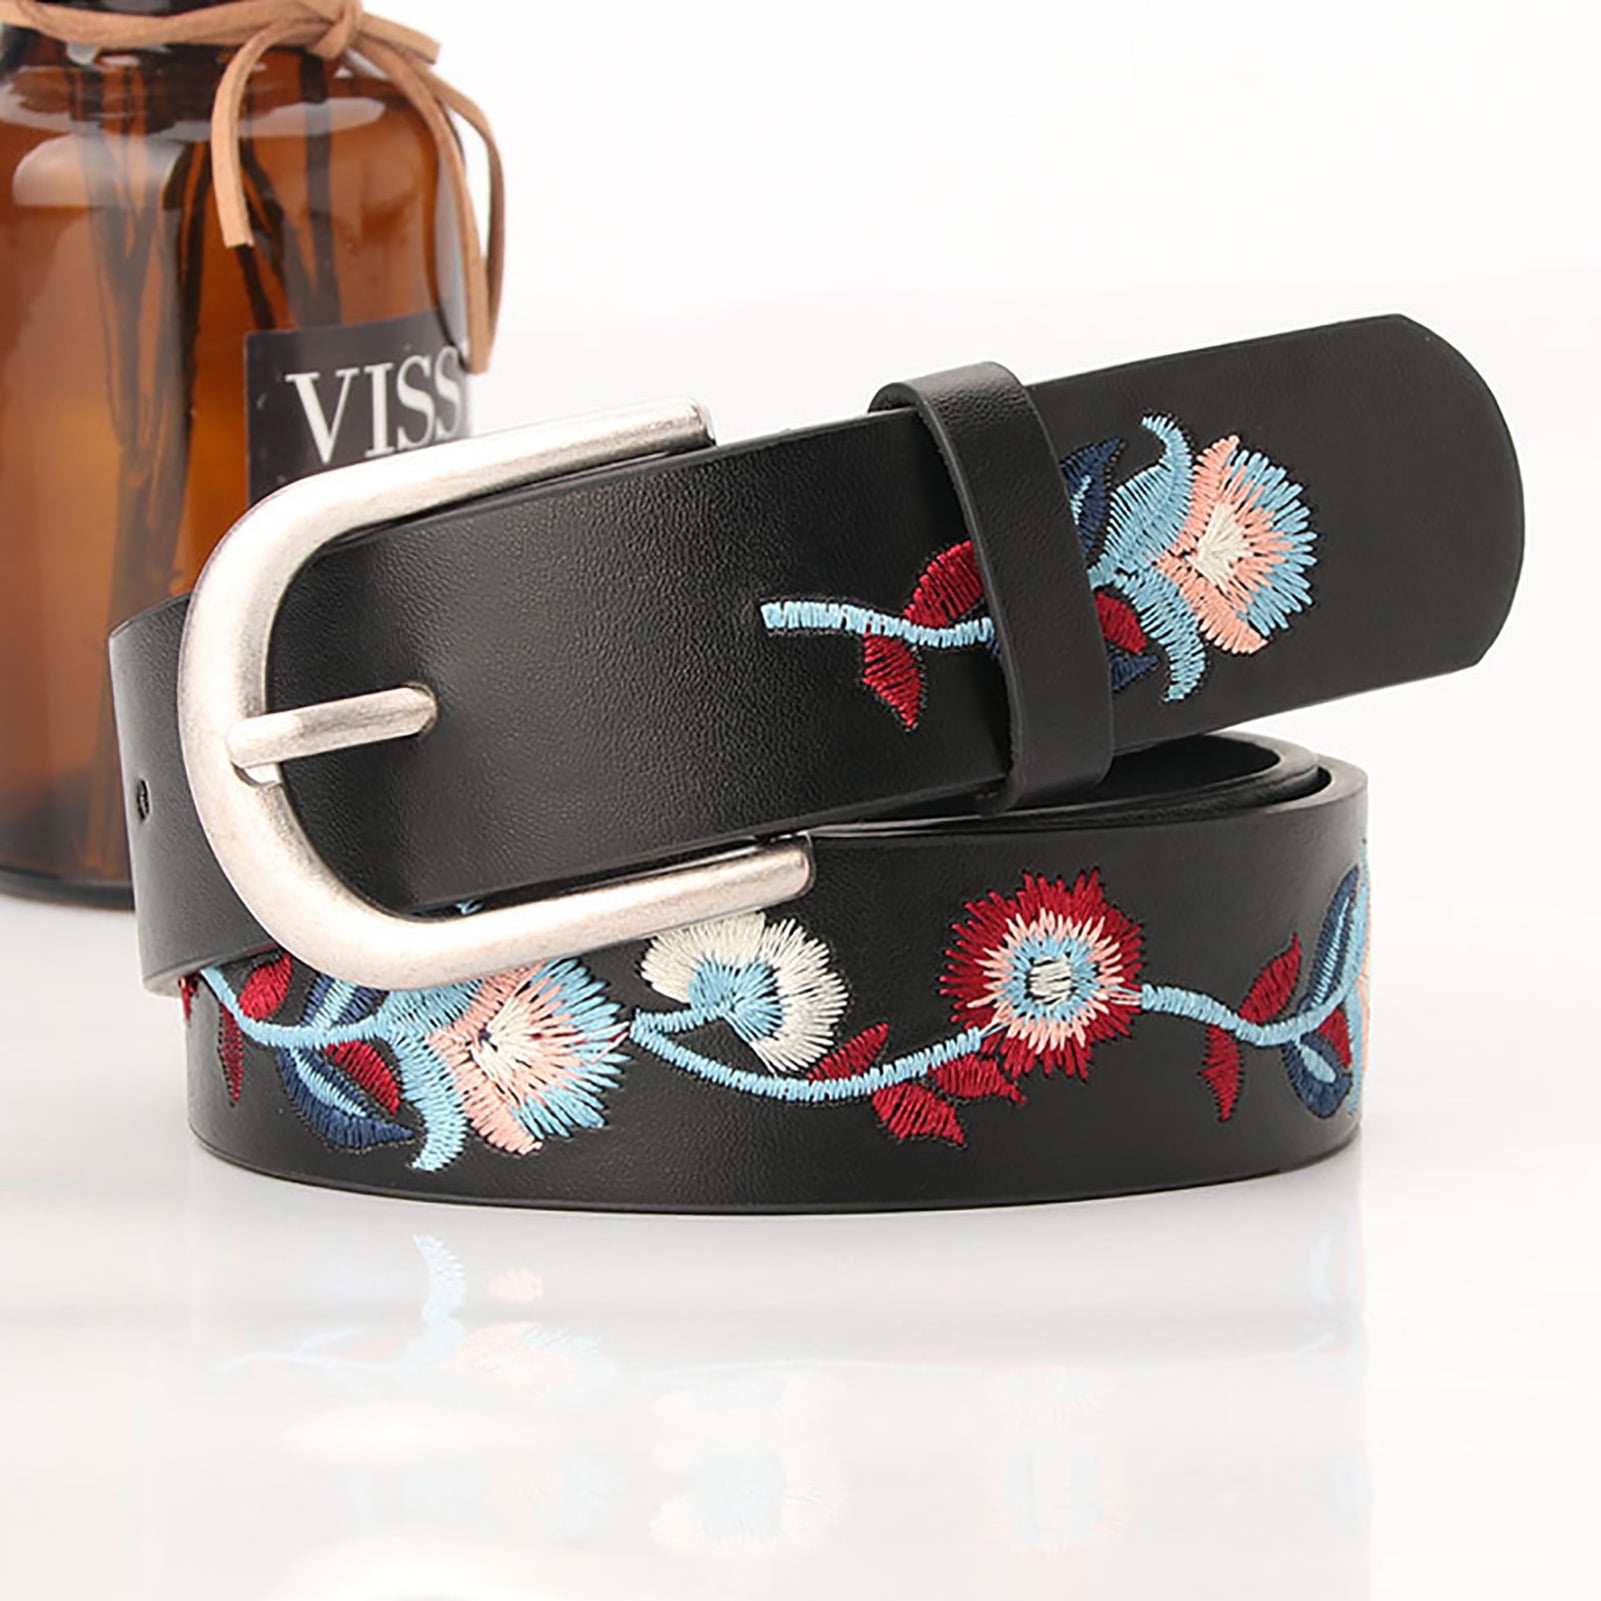 Designed Women Leather Belt 1.3in Wide Jeans Belts for Women Dresses with Christmas Gift Box 